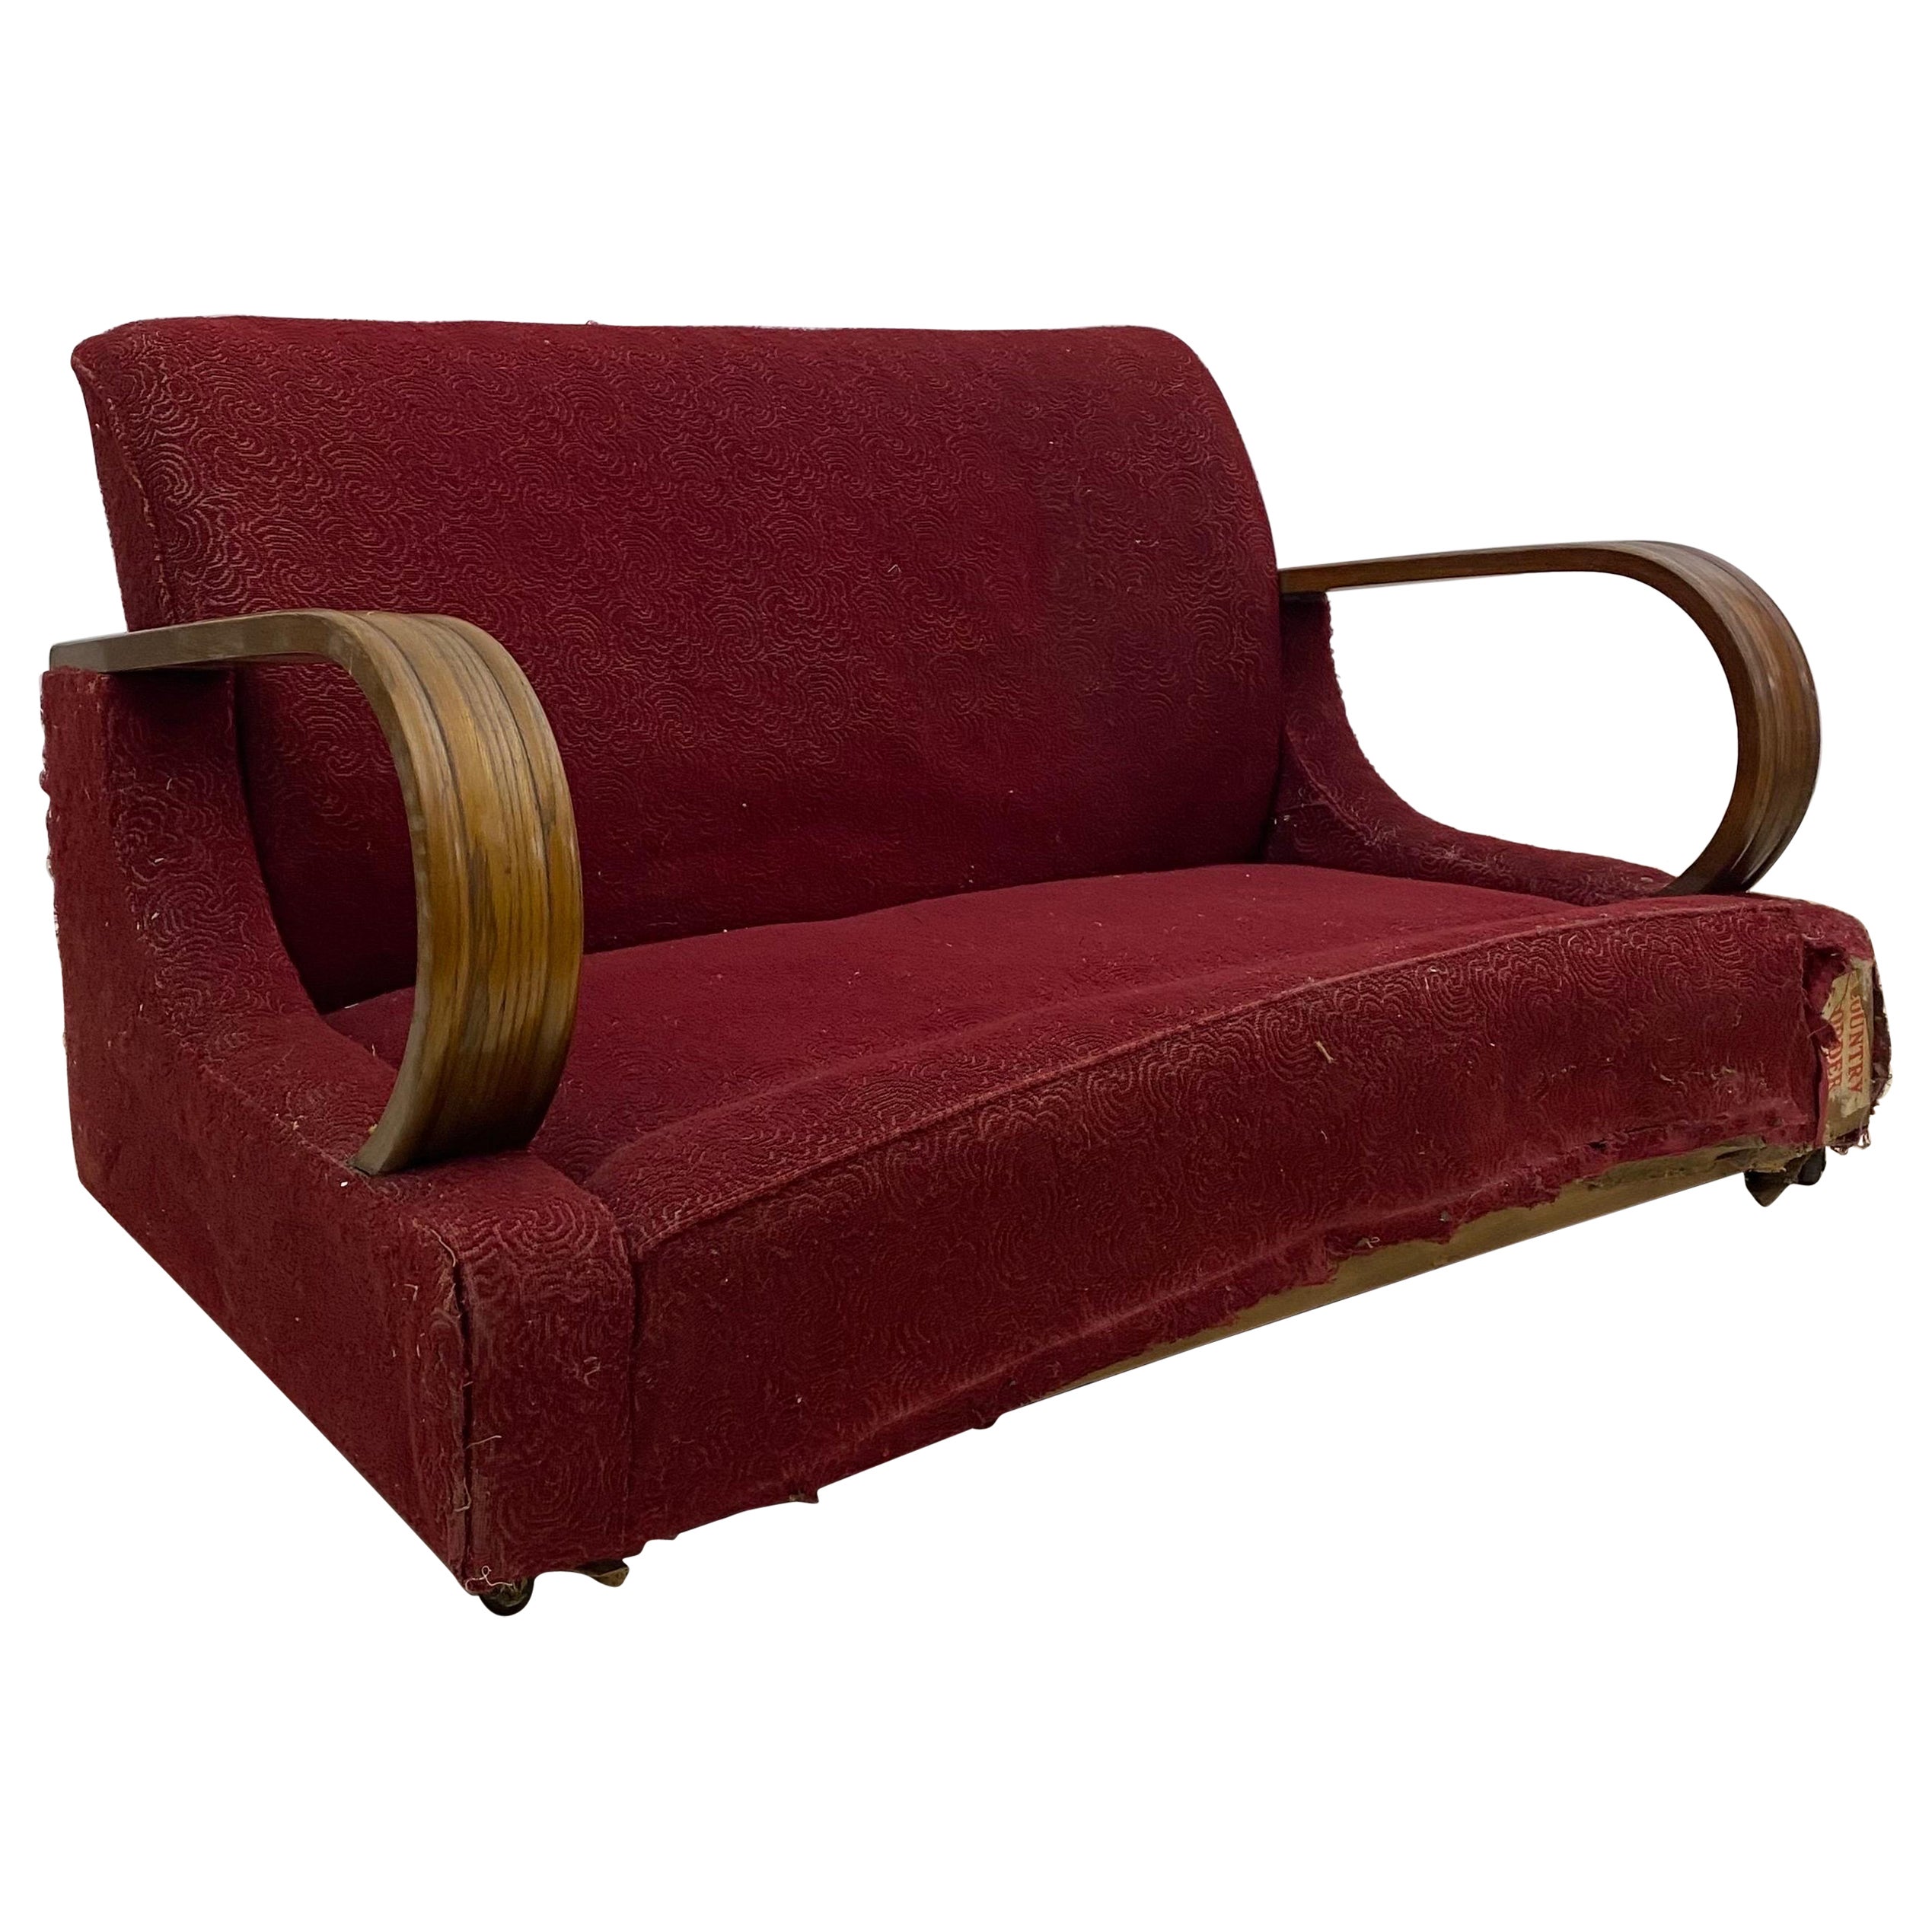 Red Two Seater Distressed Sofa Restoration Project As Seen Poirot, Art déco, 1940er Jahre, rot, Art déco